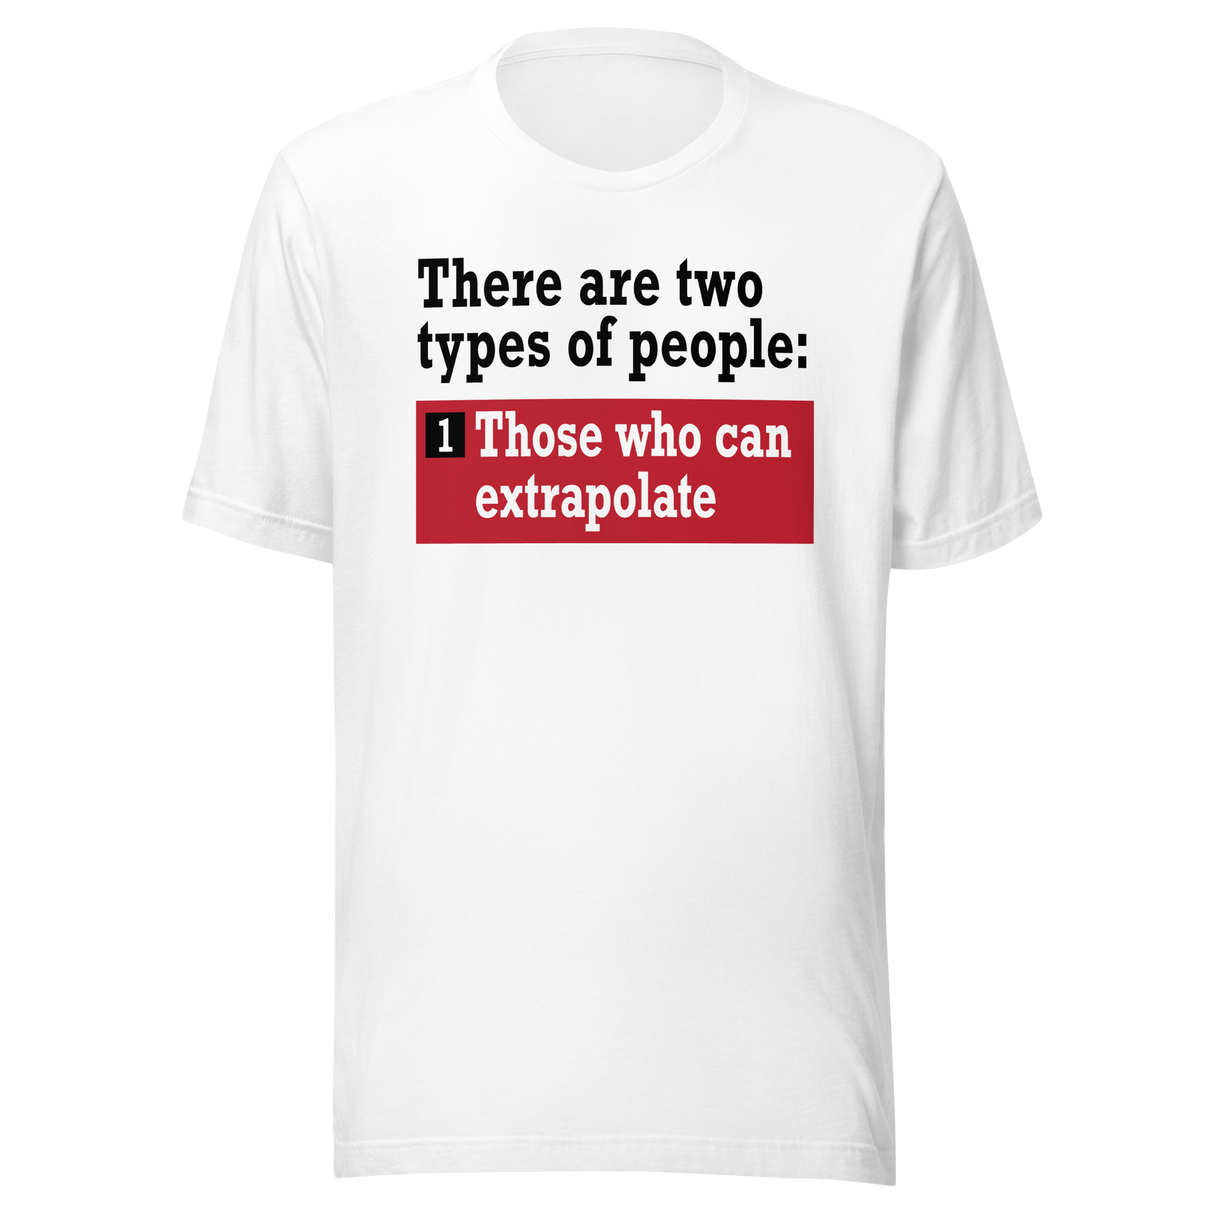 there-are-two-types-of-people-those-who-can-extrapolate-and-humor-tee-playful-t-shirt-joke-tee-t-shirt-tee#color_white